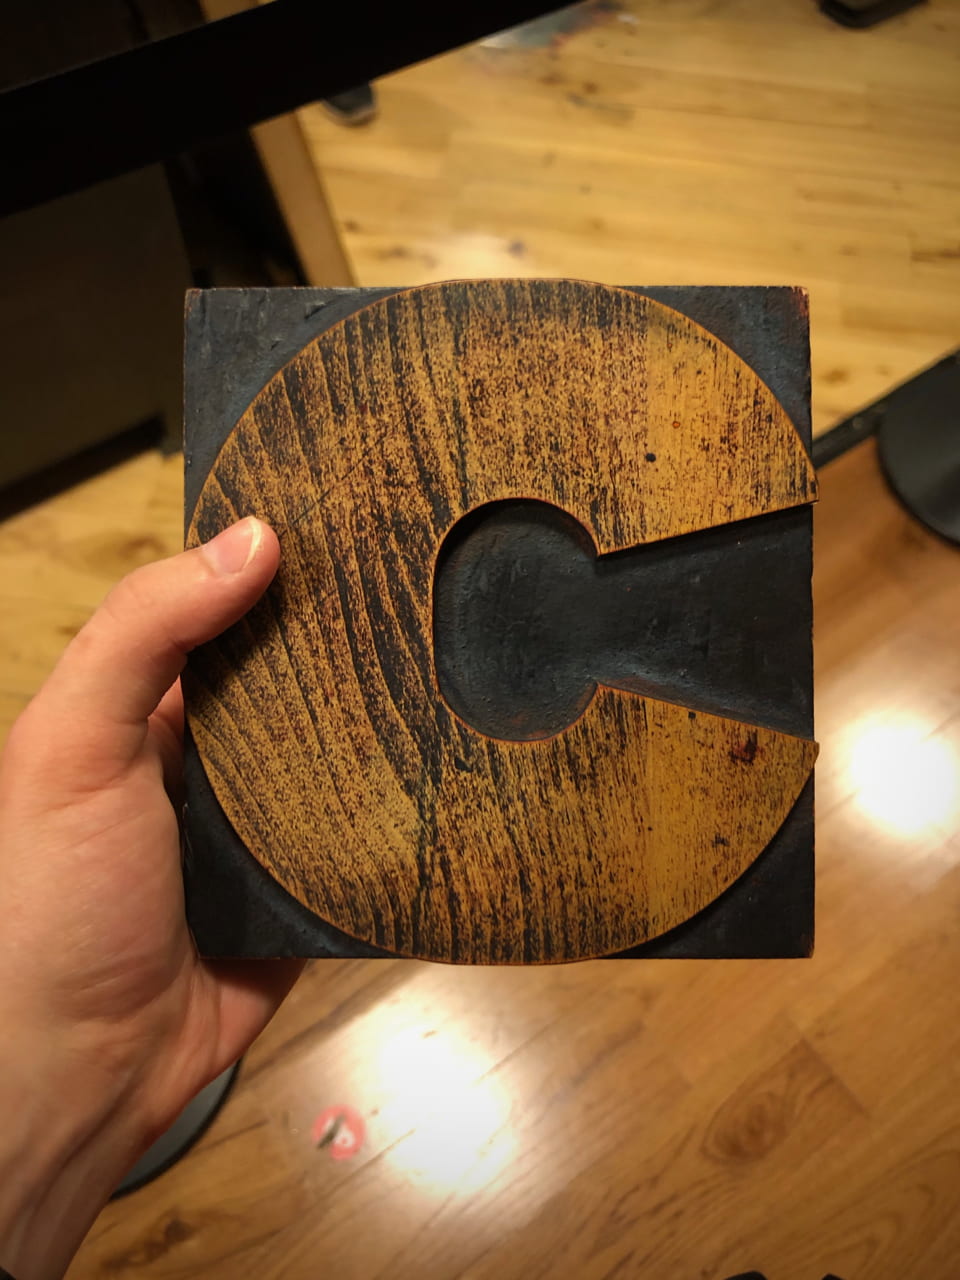 A left hand holding a square wood block cut to make the letter “C”. The person holding the block was also taking the picture. Previous ink use on this wood block accentuate the grain of the wood running at a slight diagonal across the “C.”